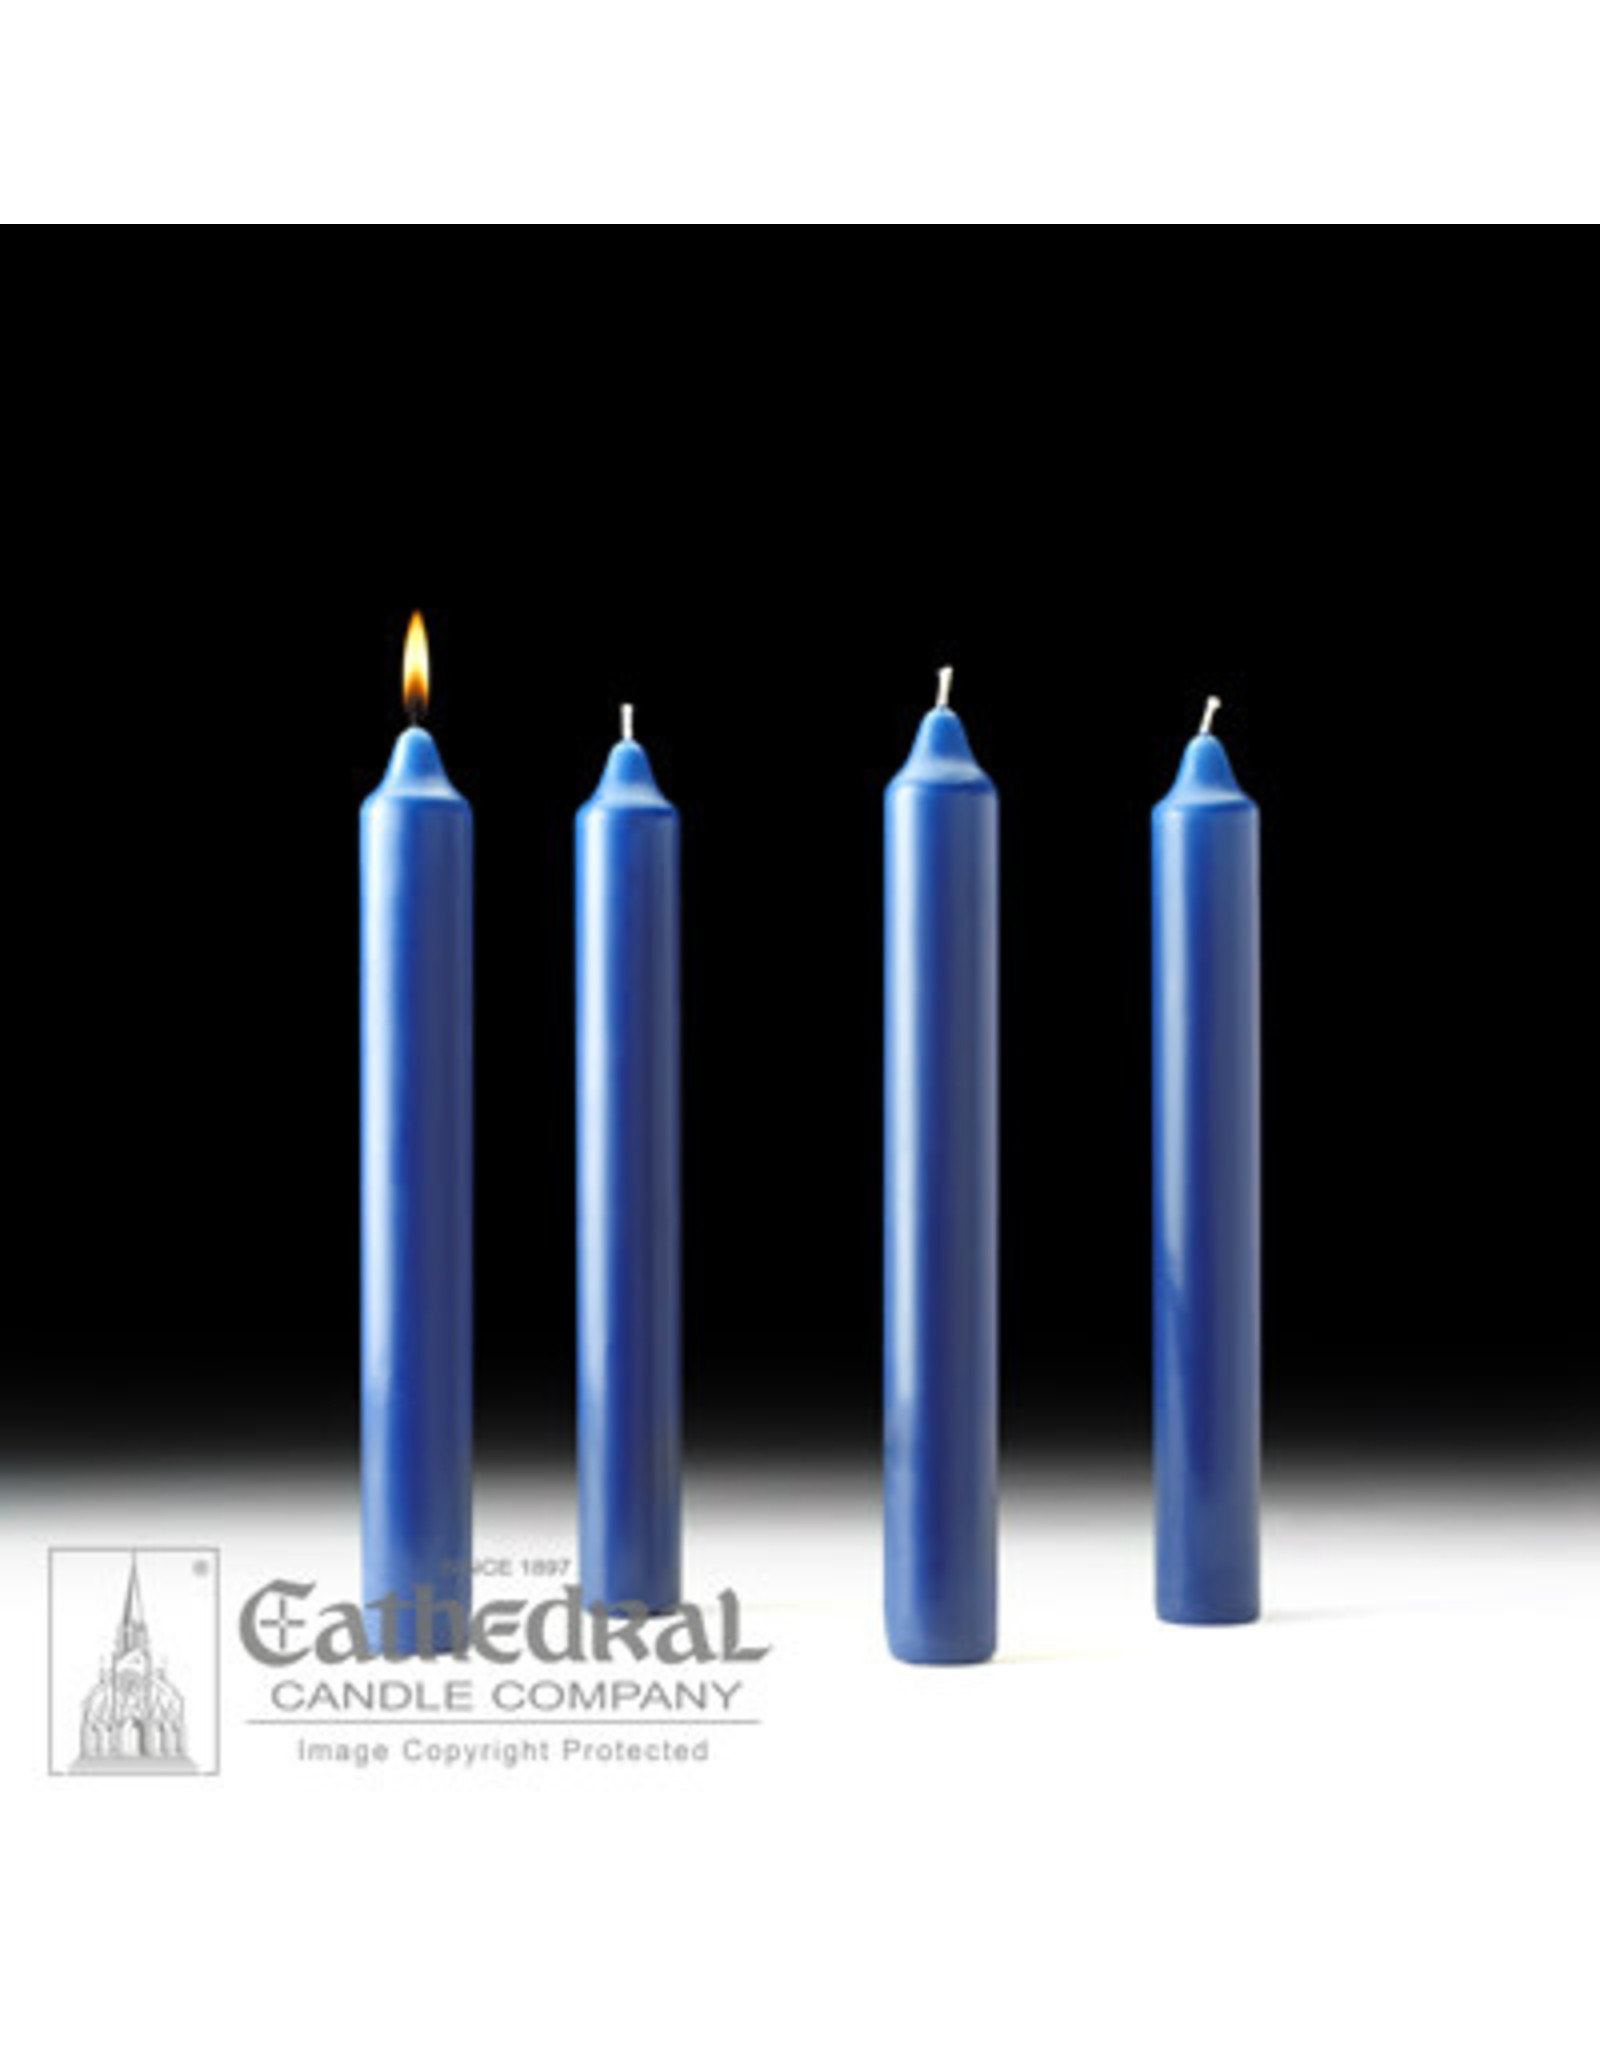 Cathedral Candle Advent Candles 1.5x12 (4 Sarum Blue)